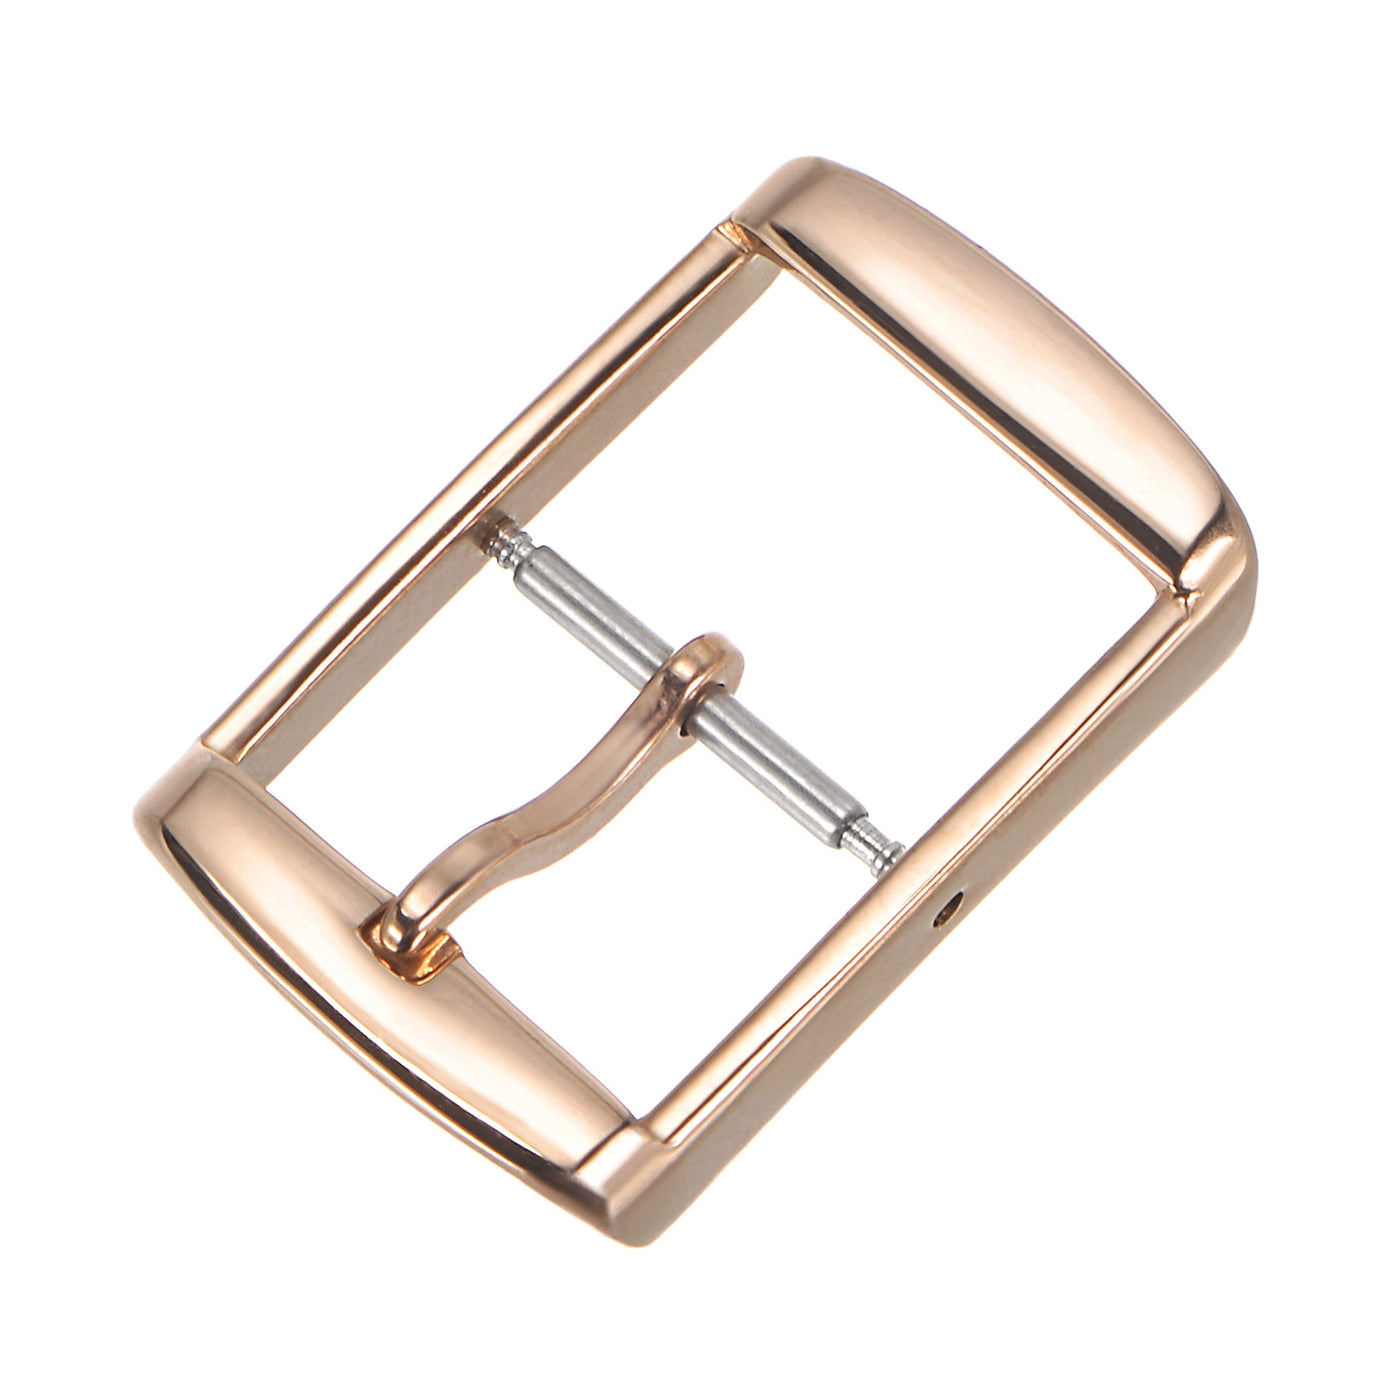 Uxcell Uxcell Watch SUS304 Polished Flat Buckle, for 16mm Width Watch Bands, Rose Gold Tone